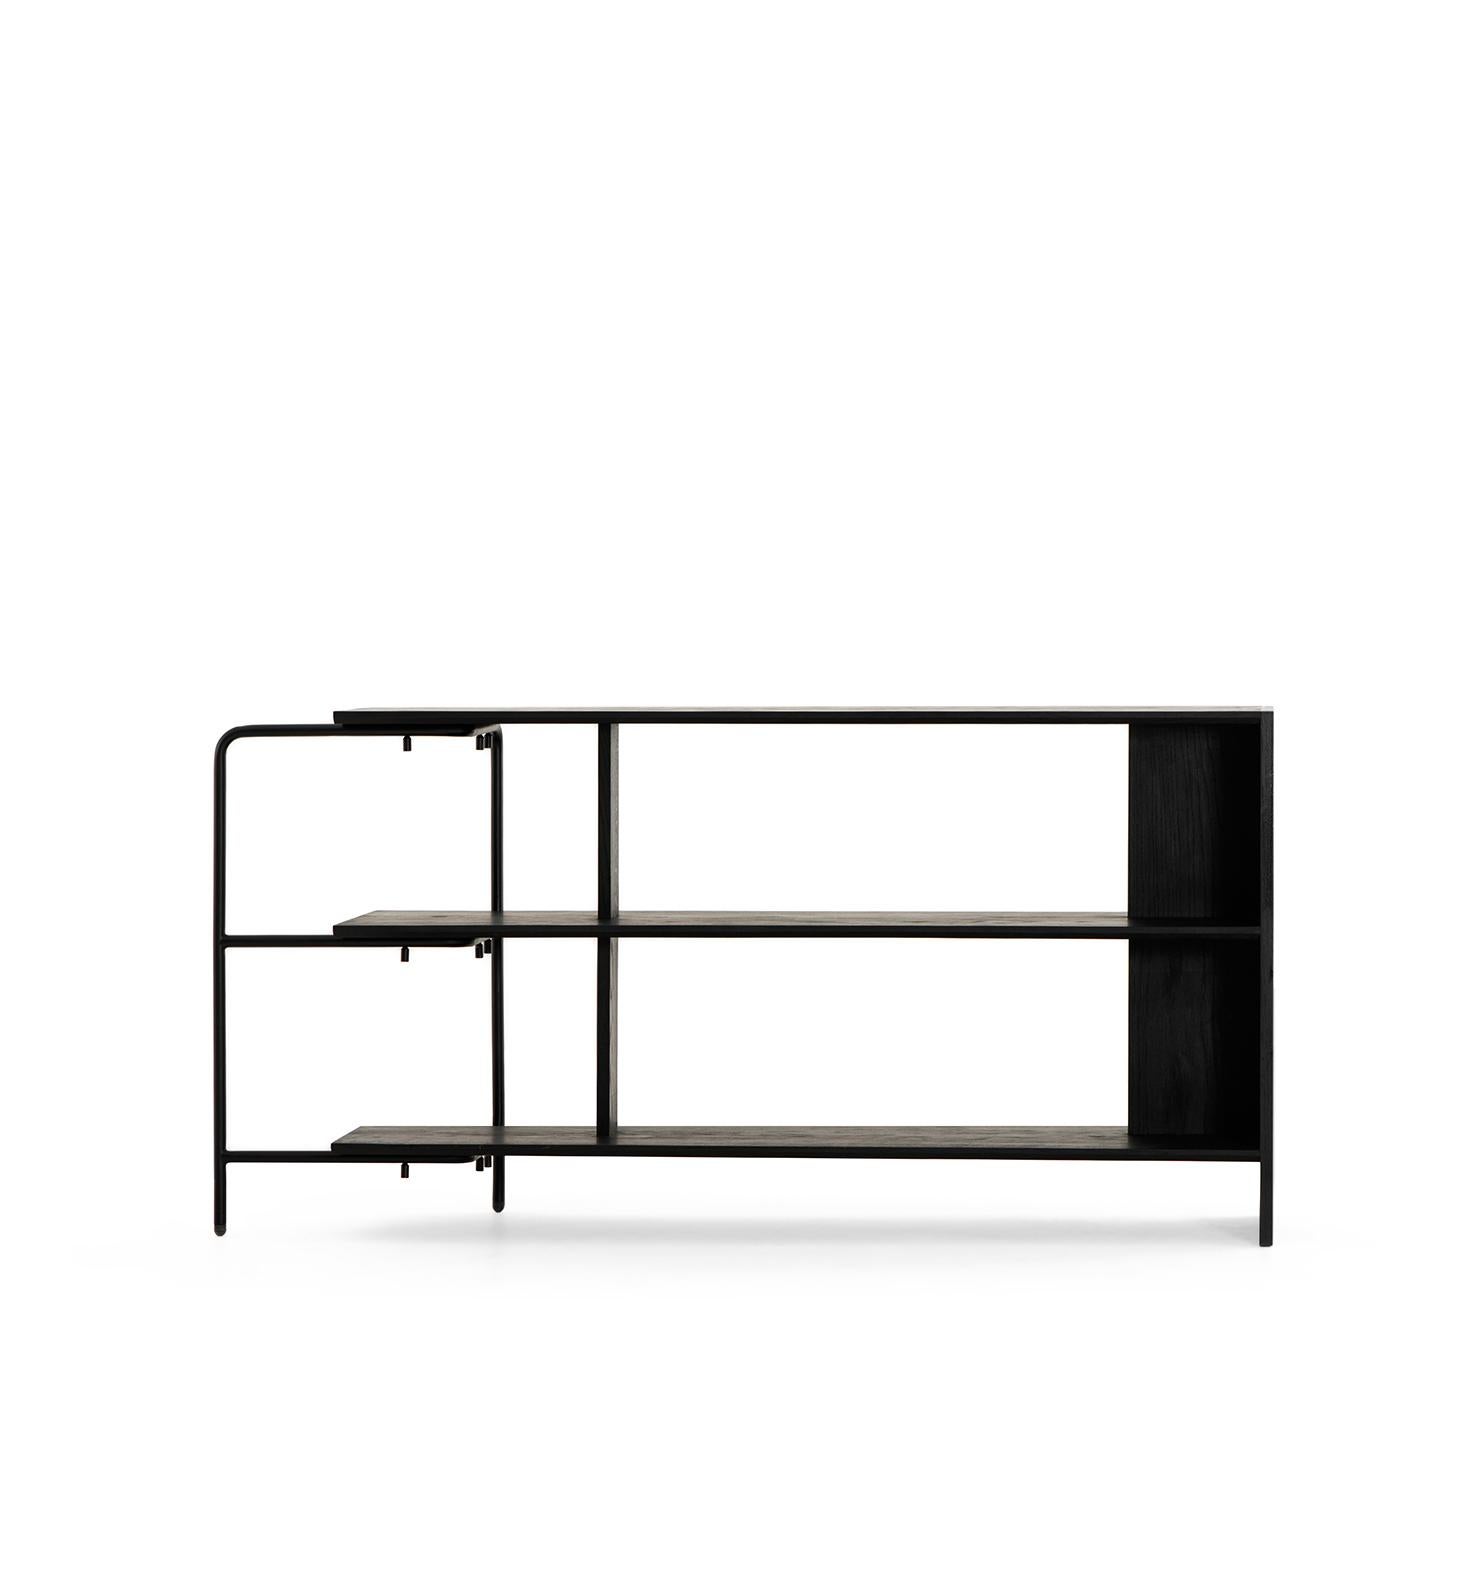 It belongs to the exclusive line of Cuchara, showcasing the highest quality materials and exquisite craftsmanship. With its unique blend of black electro-painted carbon steel and solid wood, this bookcase stands out as a stunning piece of